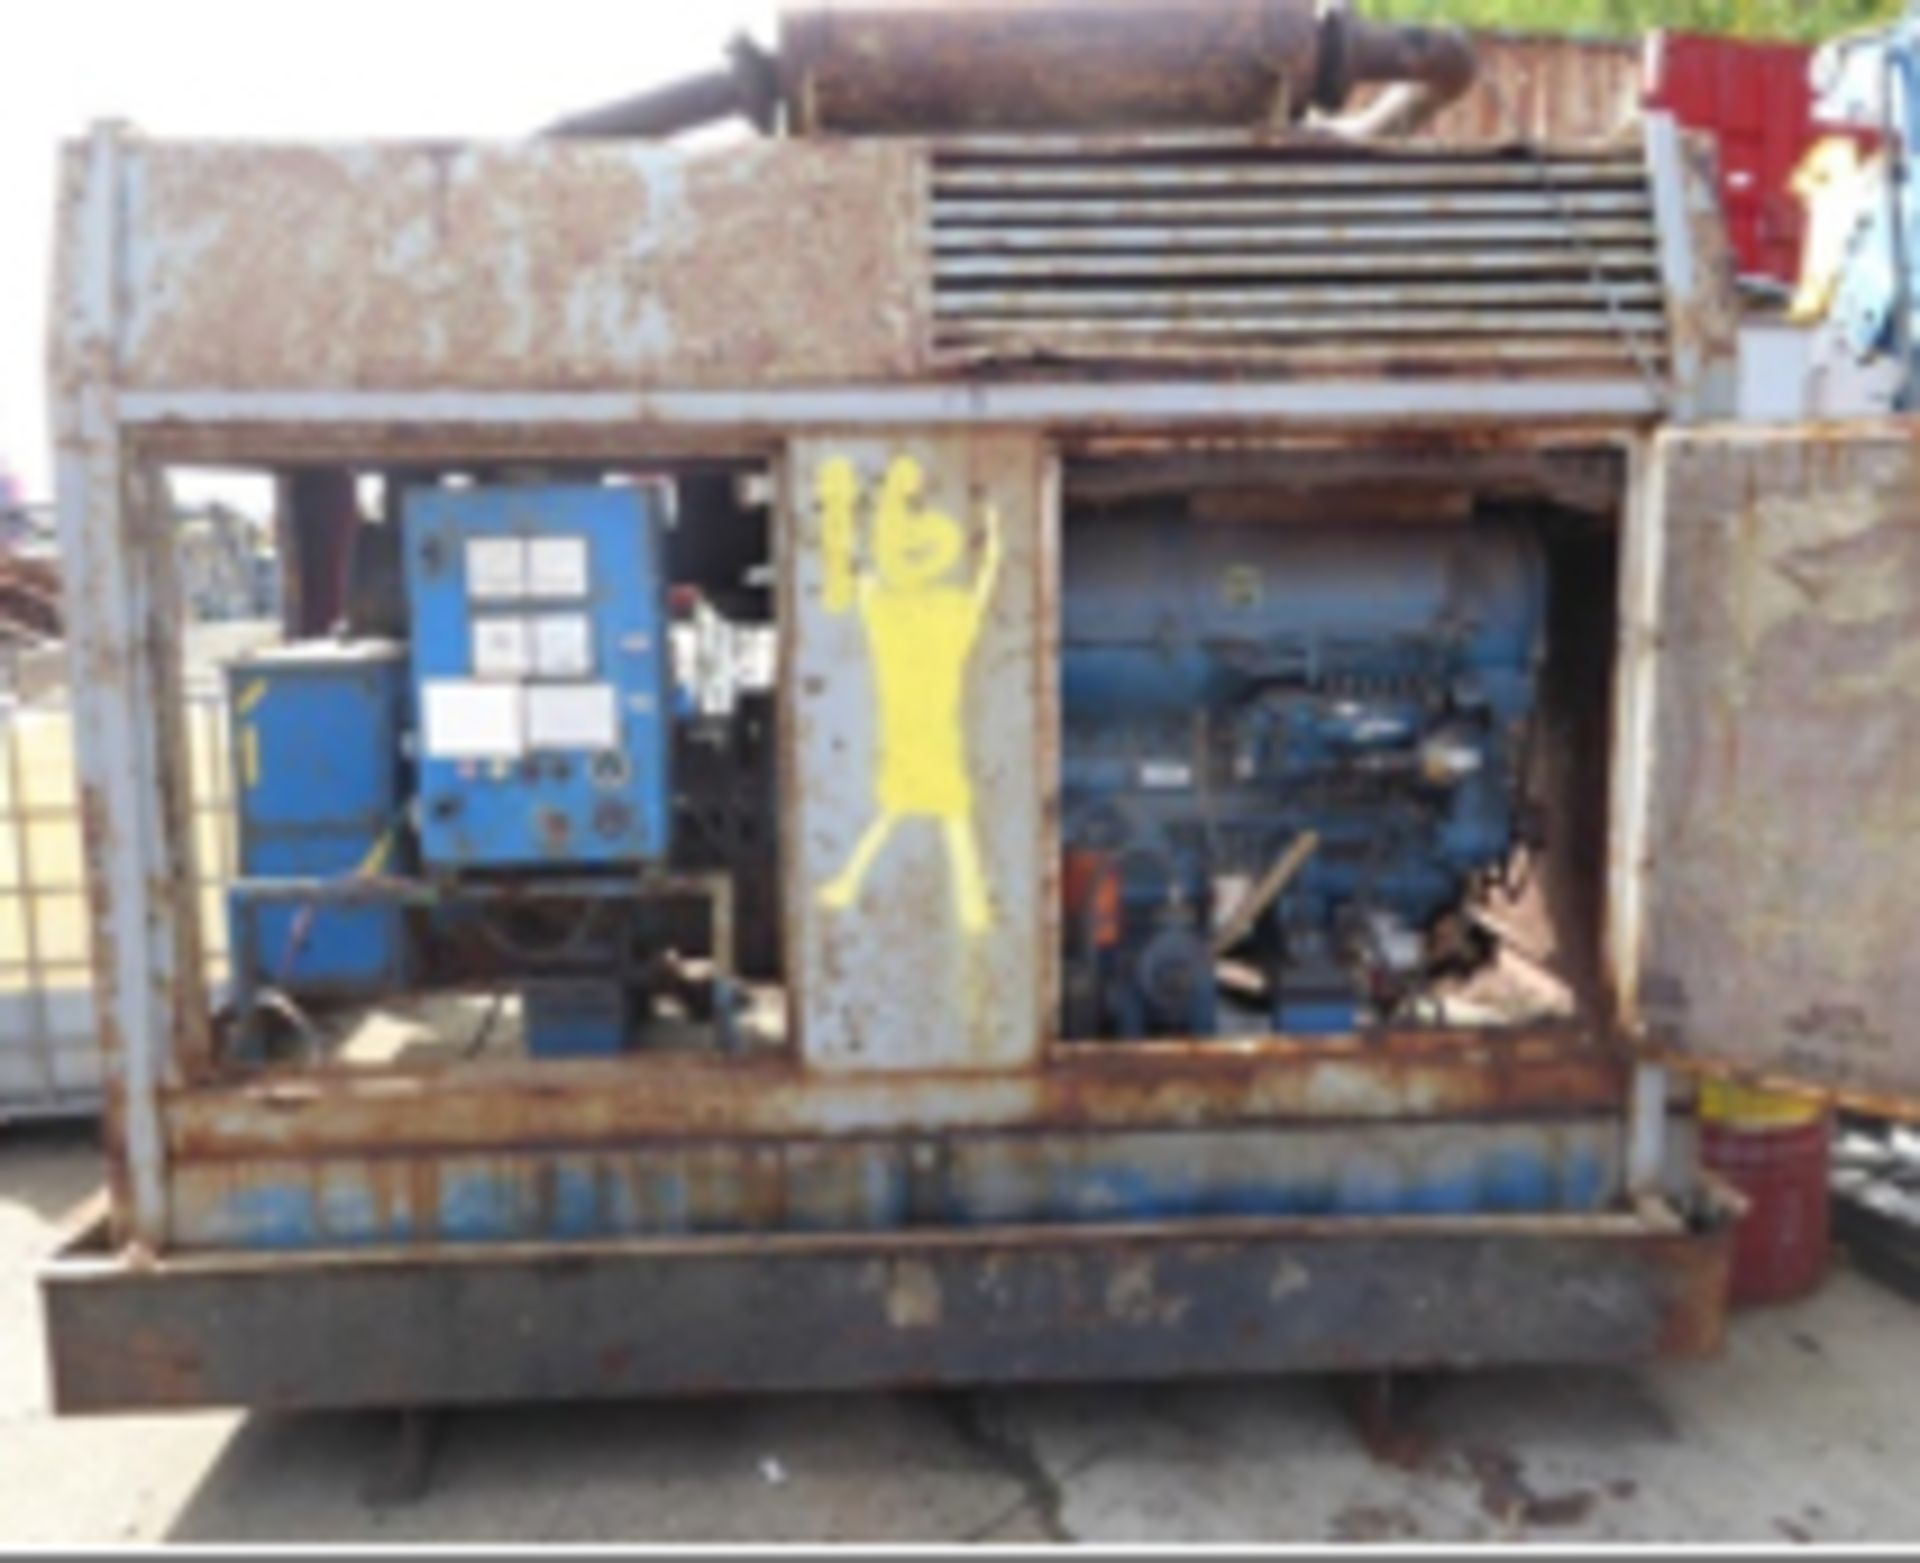 DEUTZ 6 cylinder 110kva generator housed in cabinet. 4262hrs (not verified), Reasonable condition. E